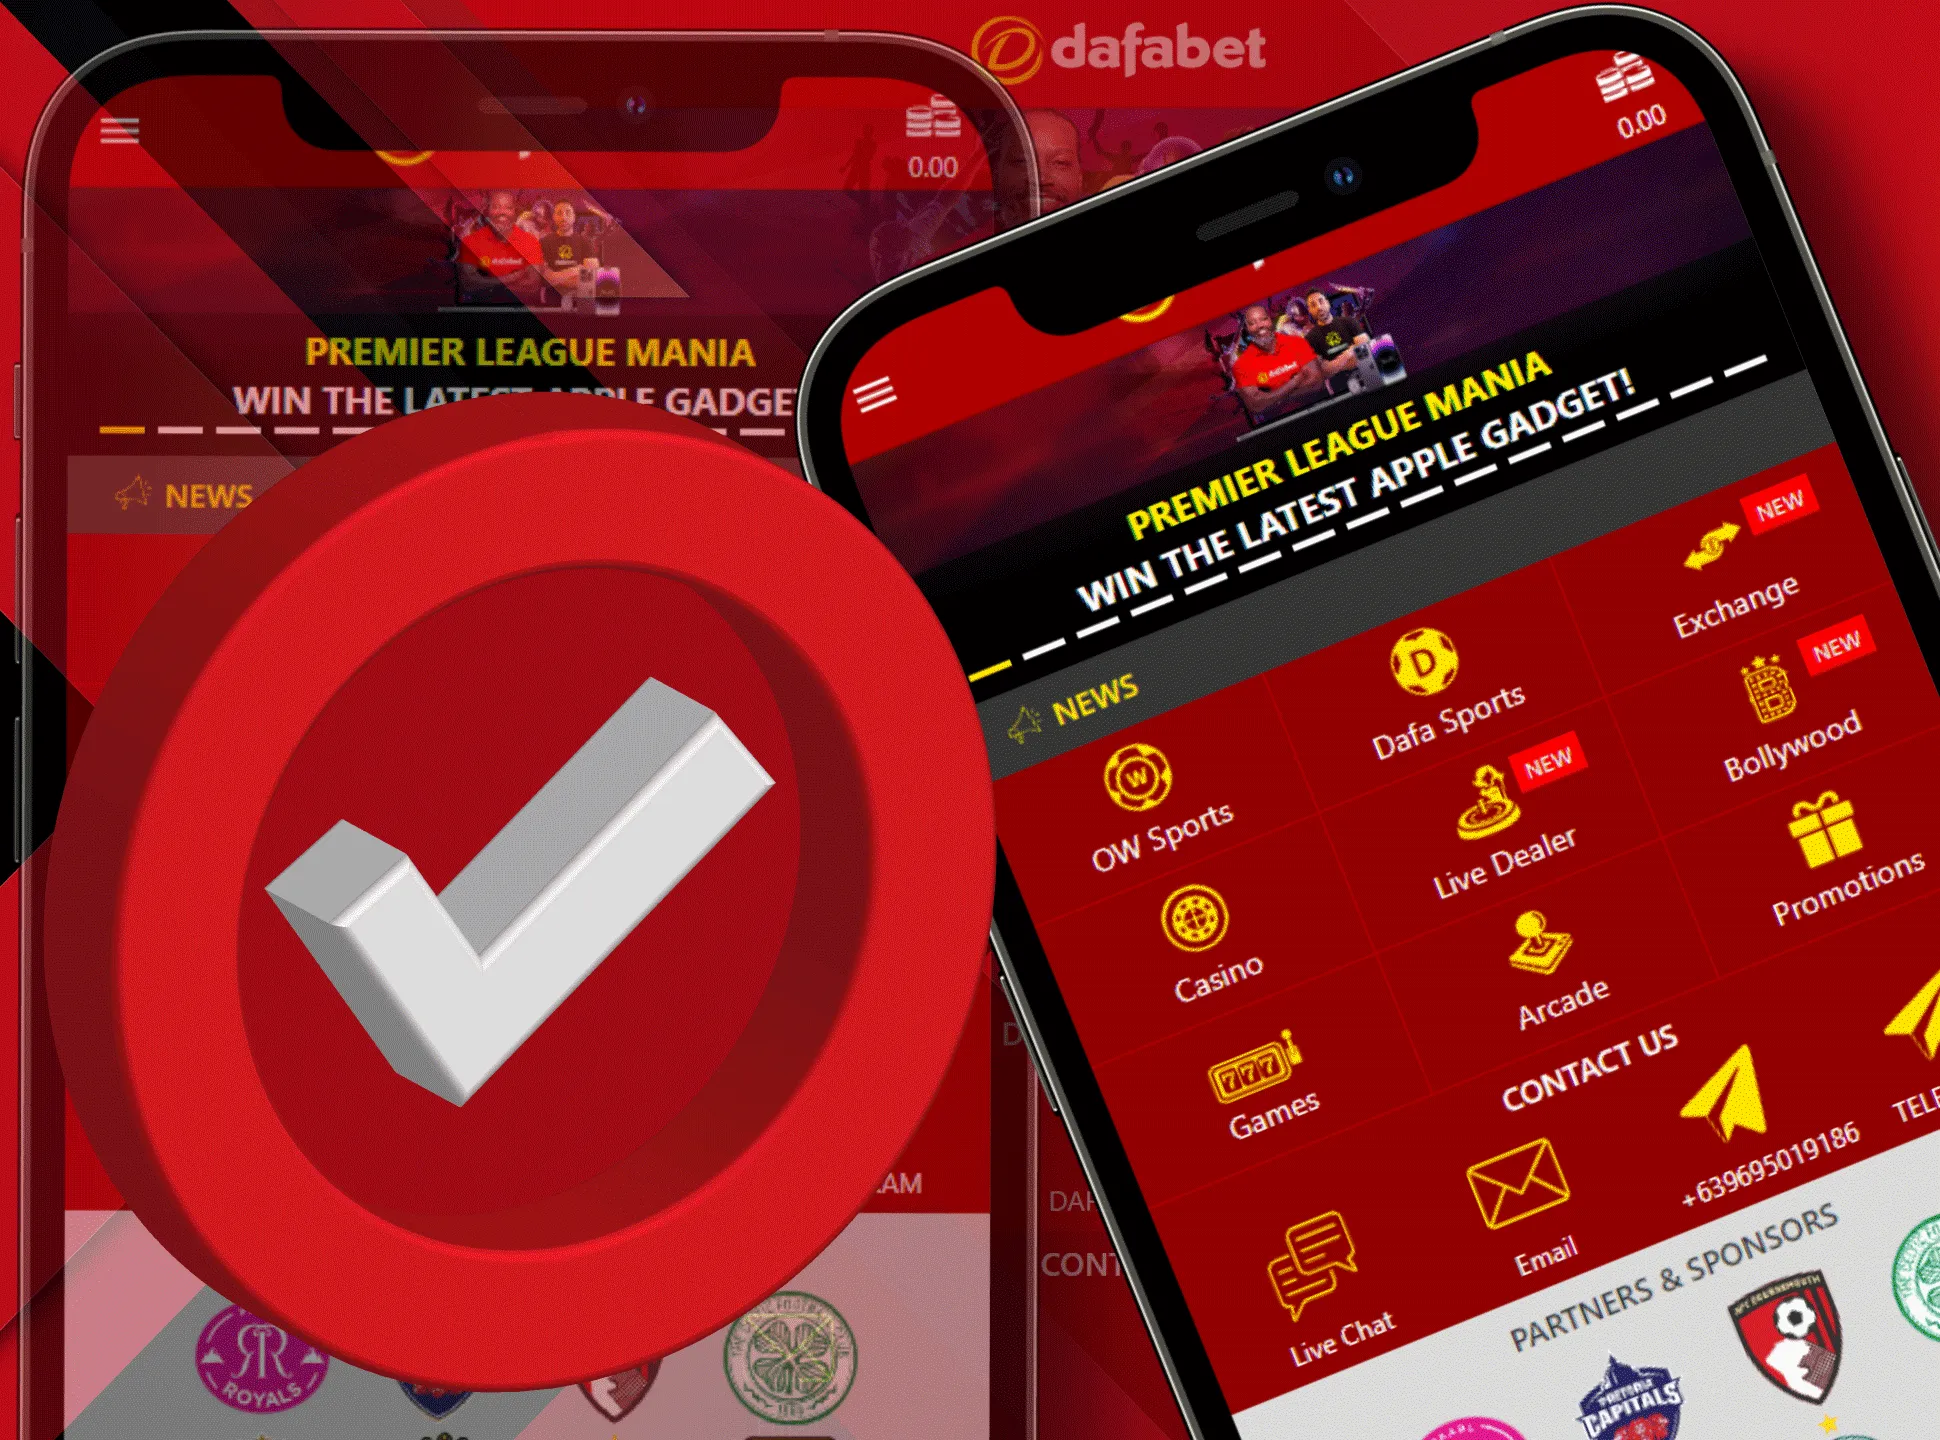 Get the Dafabet mobile app for more convenient betting.